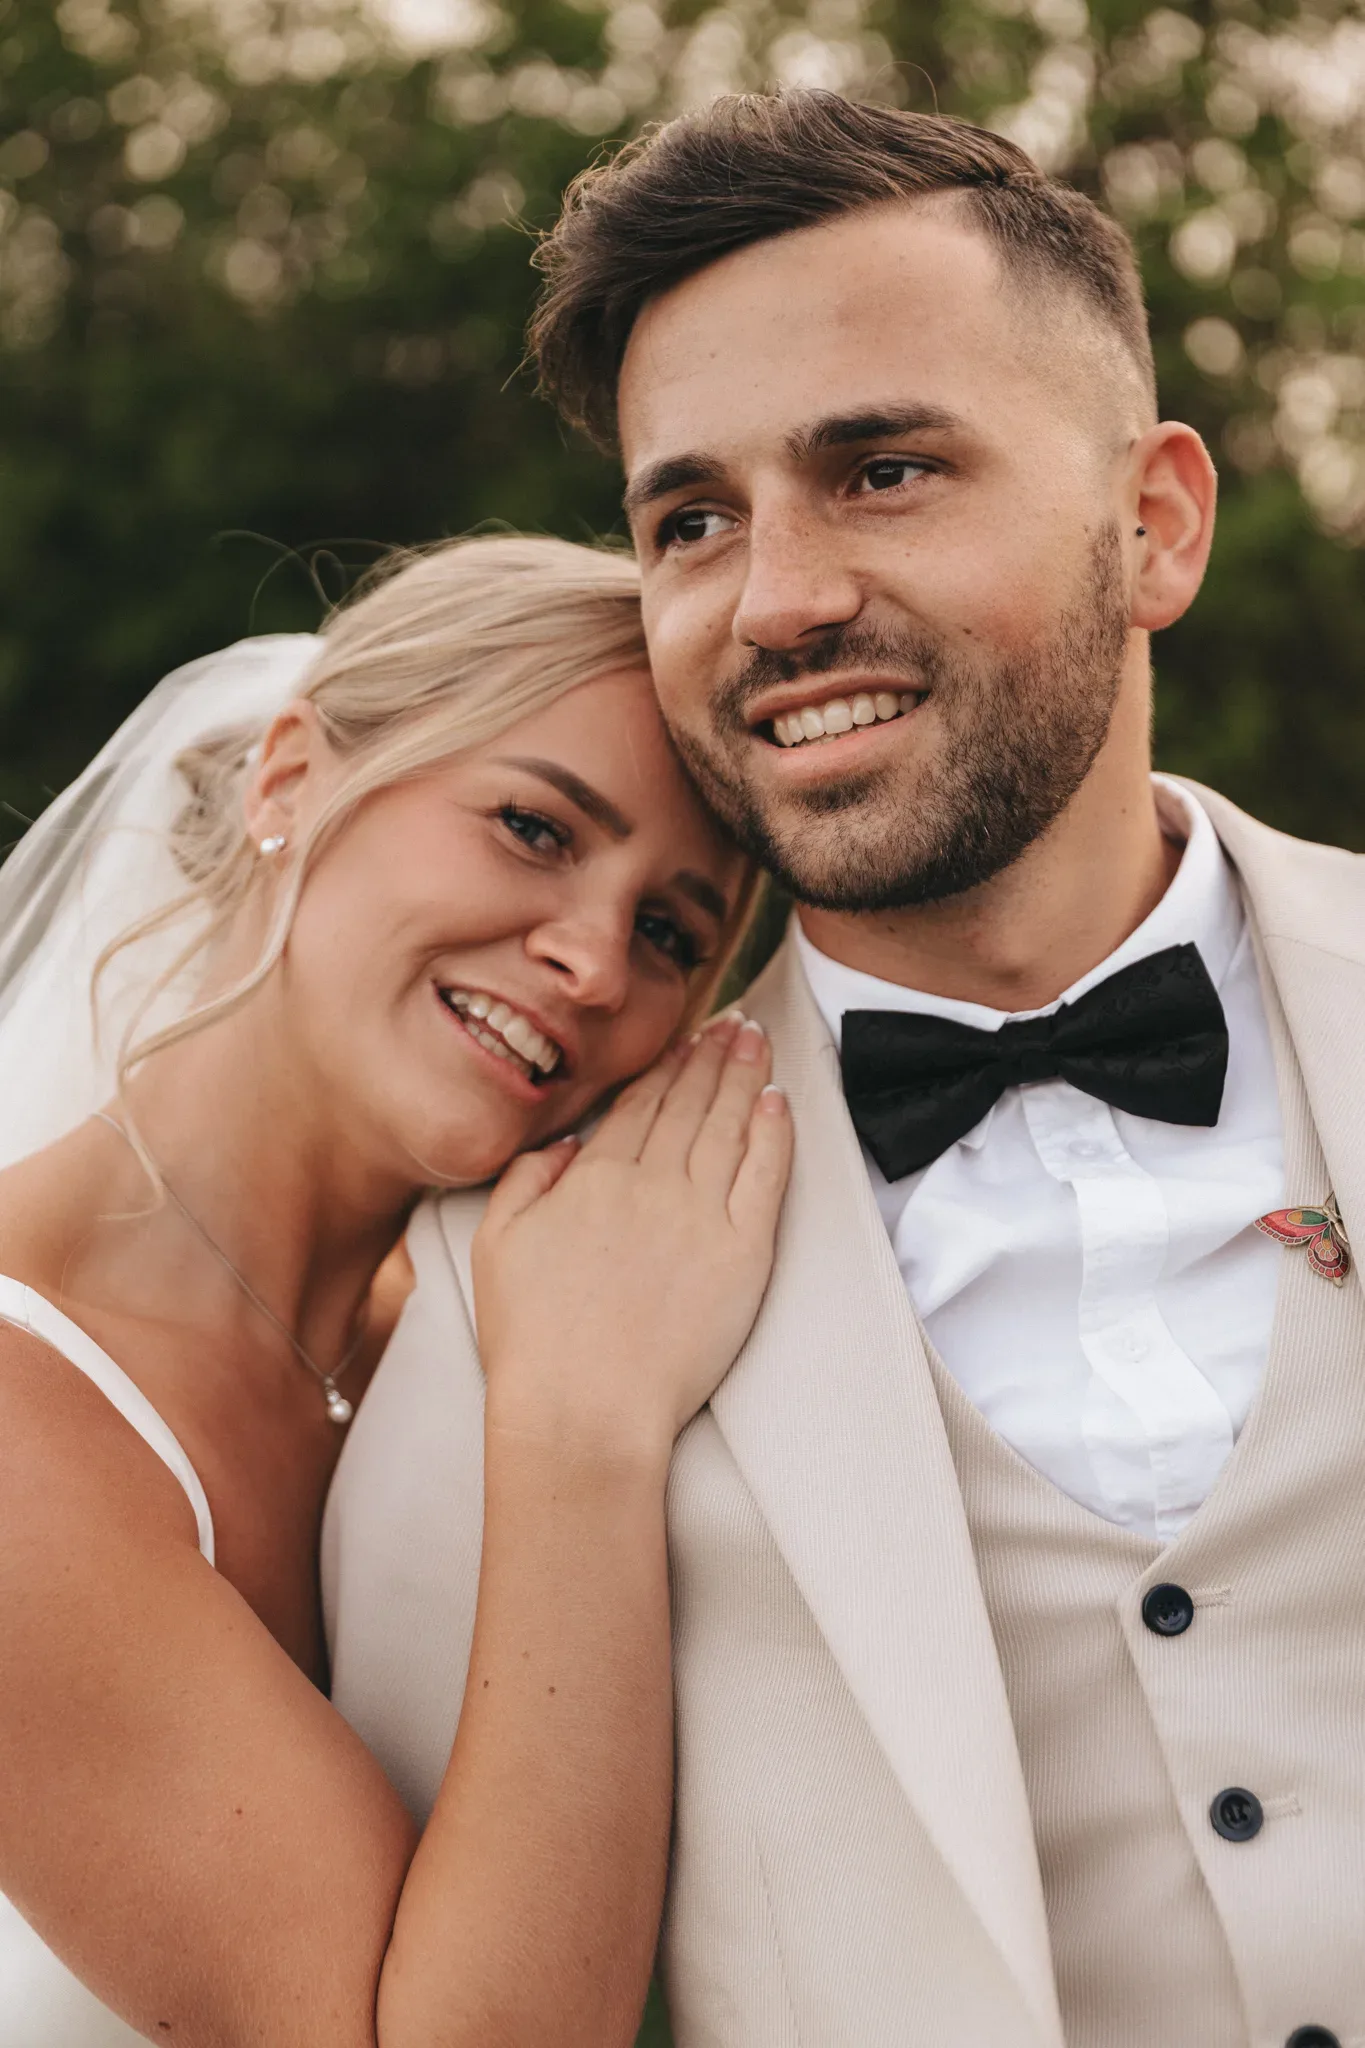 A close-up of a joyful bride and groom. the bride, leaning on the groom's shoulder, is smiling broadly, displaying her blonde hair and white dress. the groom, in a white suit and black bow tie, is glancing away with a subtle smile.